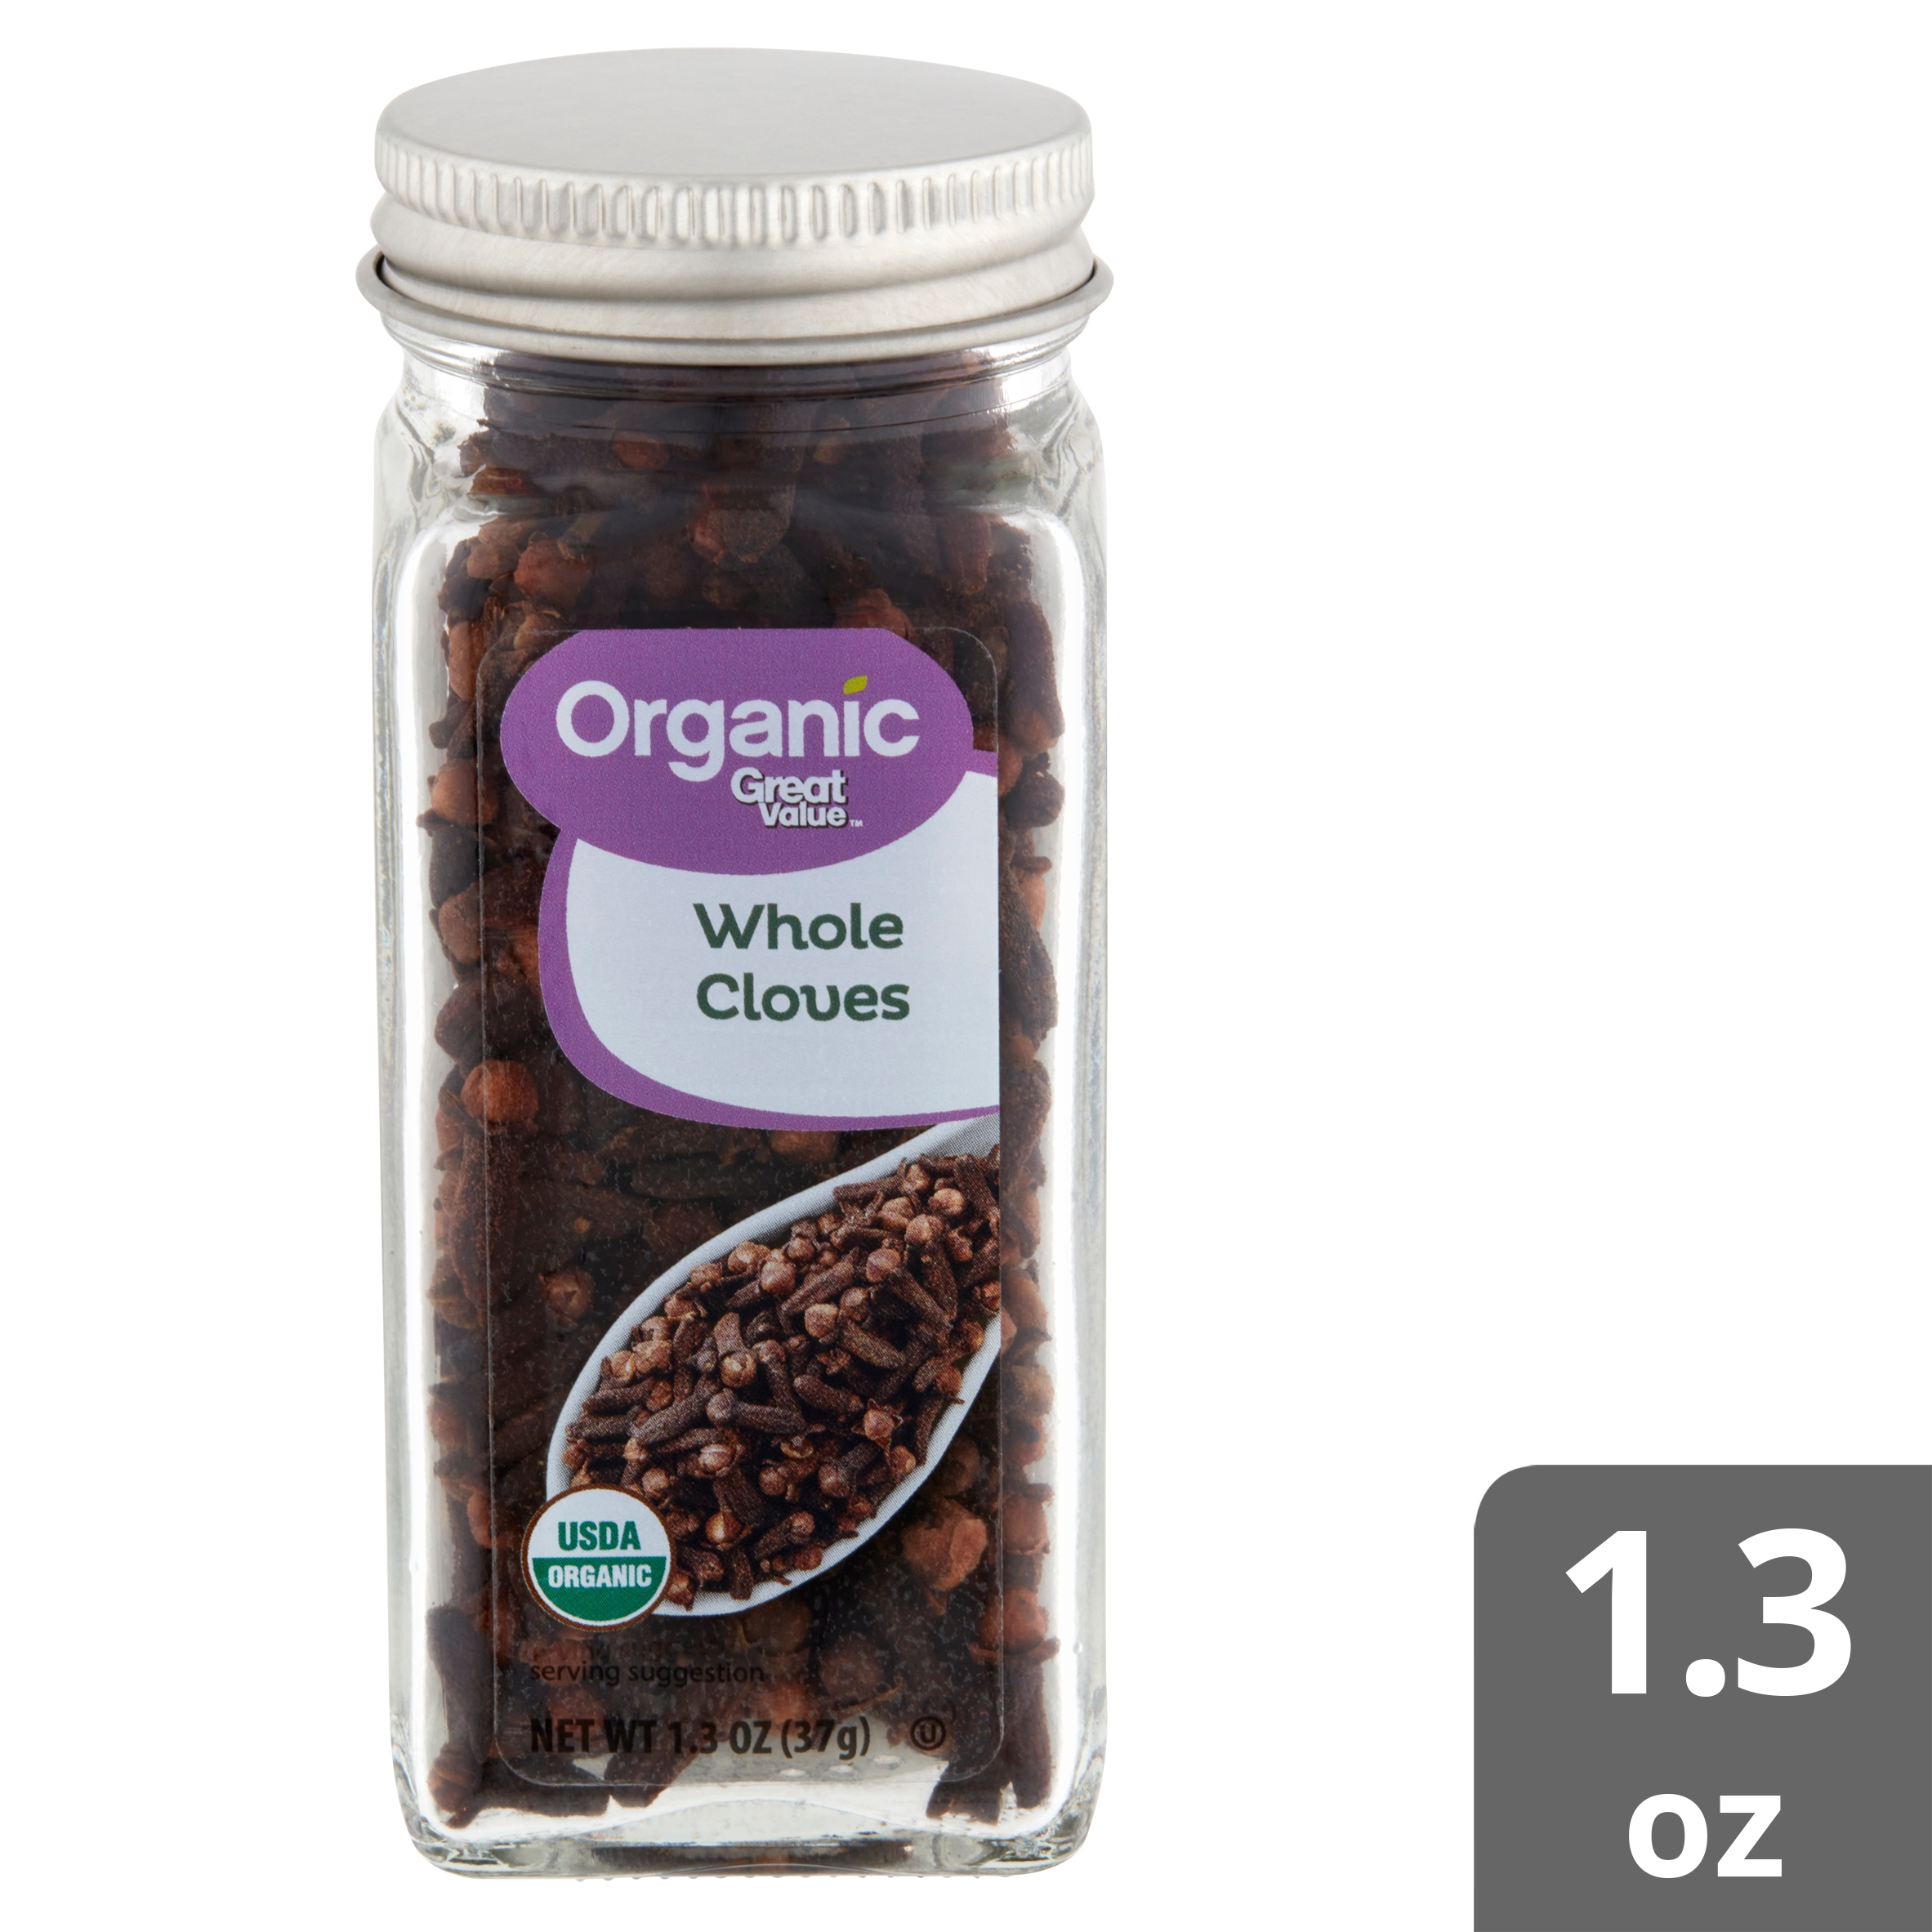 Great Value Organic Whole Cloves, 1.3 oz - image 3 of 10